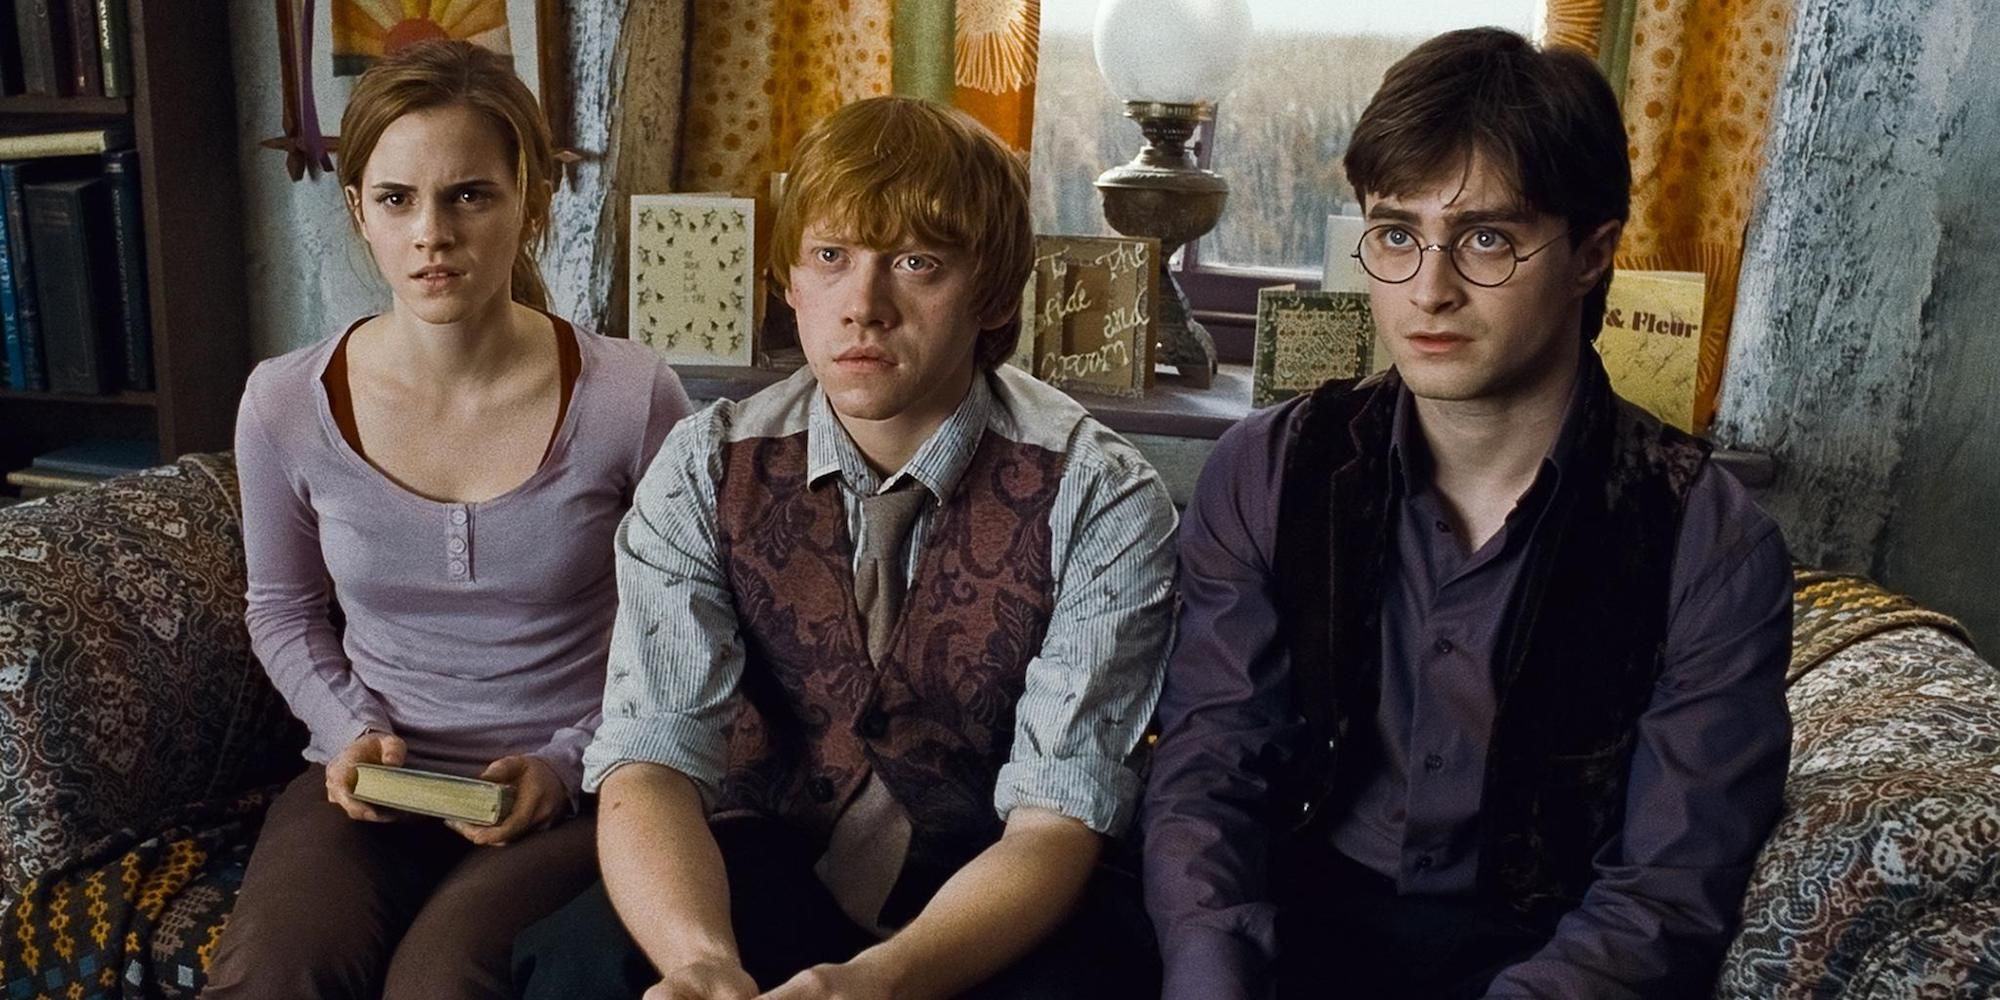 In Harry Potter and the Deathly Hallows Part 1, Harry, Ron, and Hermione sit together looking confused.